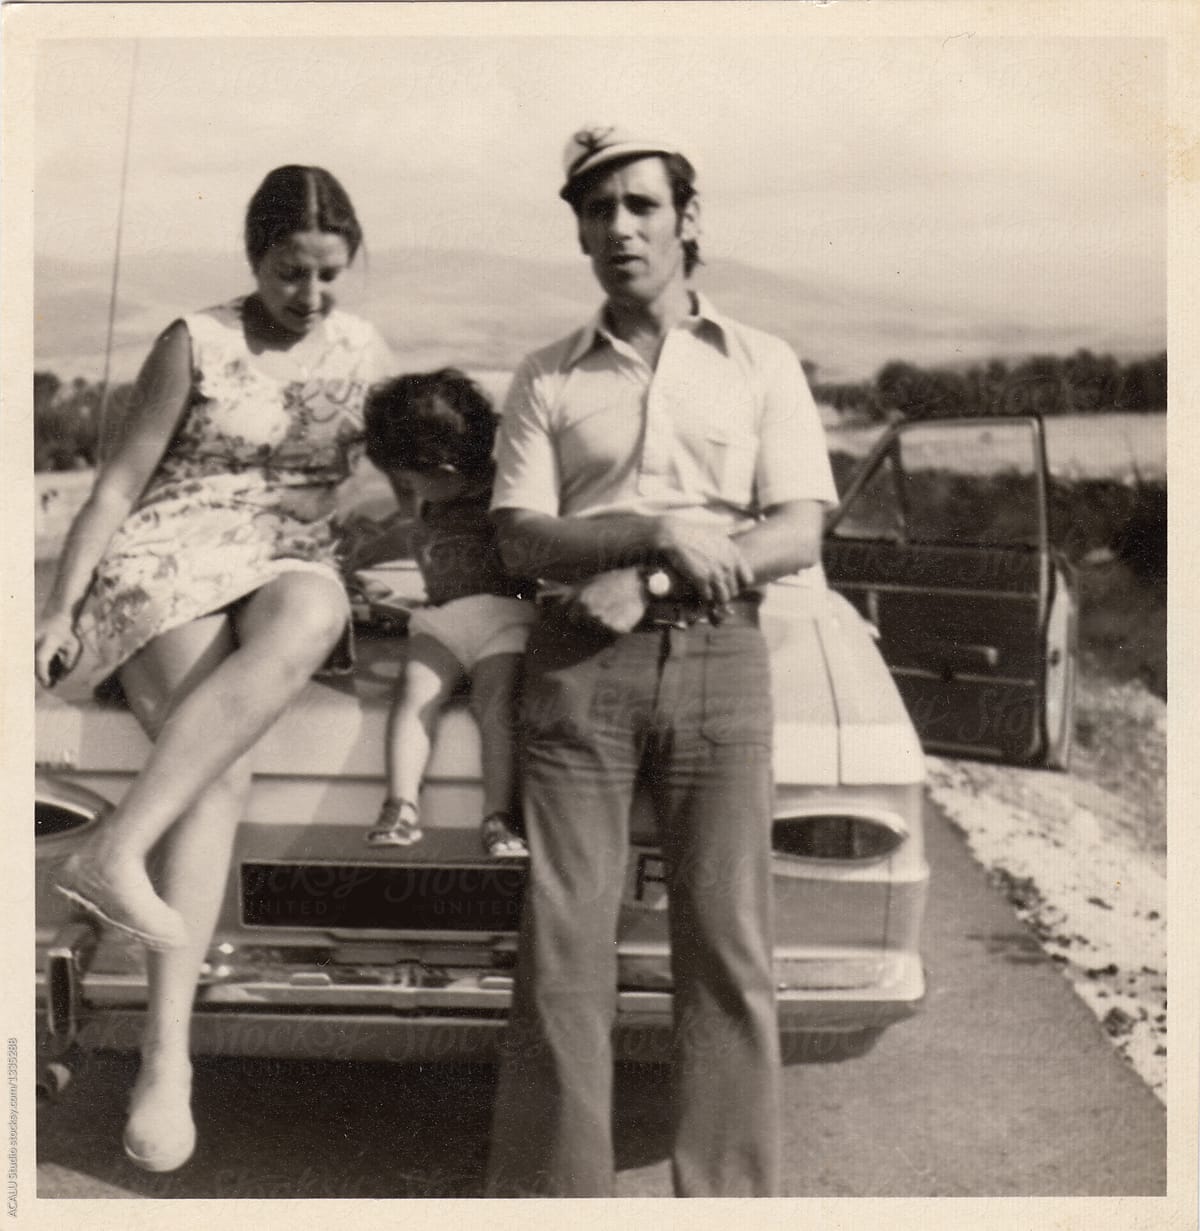 Old scanned photo of a family resting on the trunk of their car